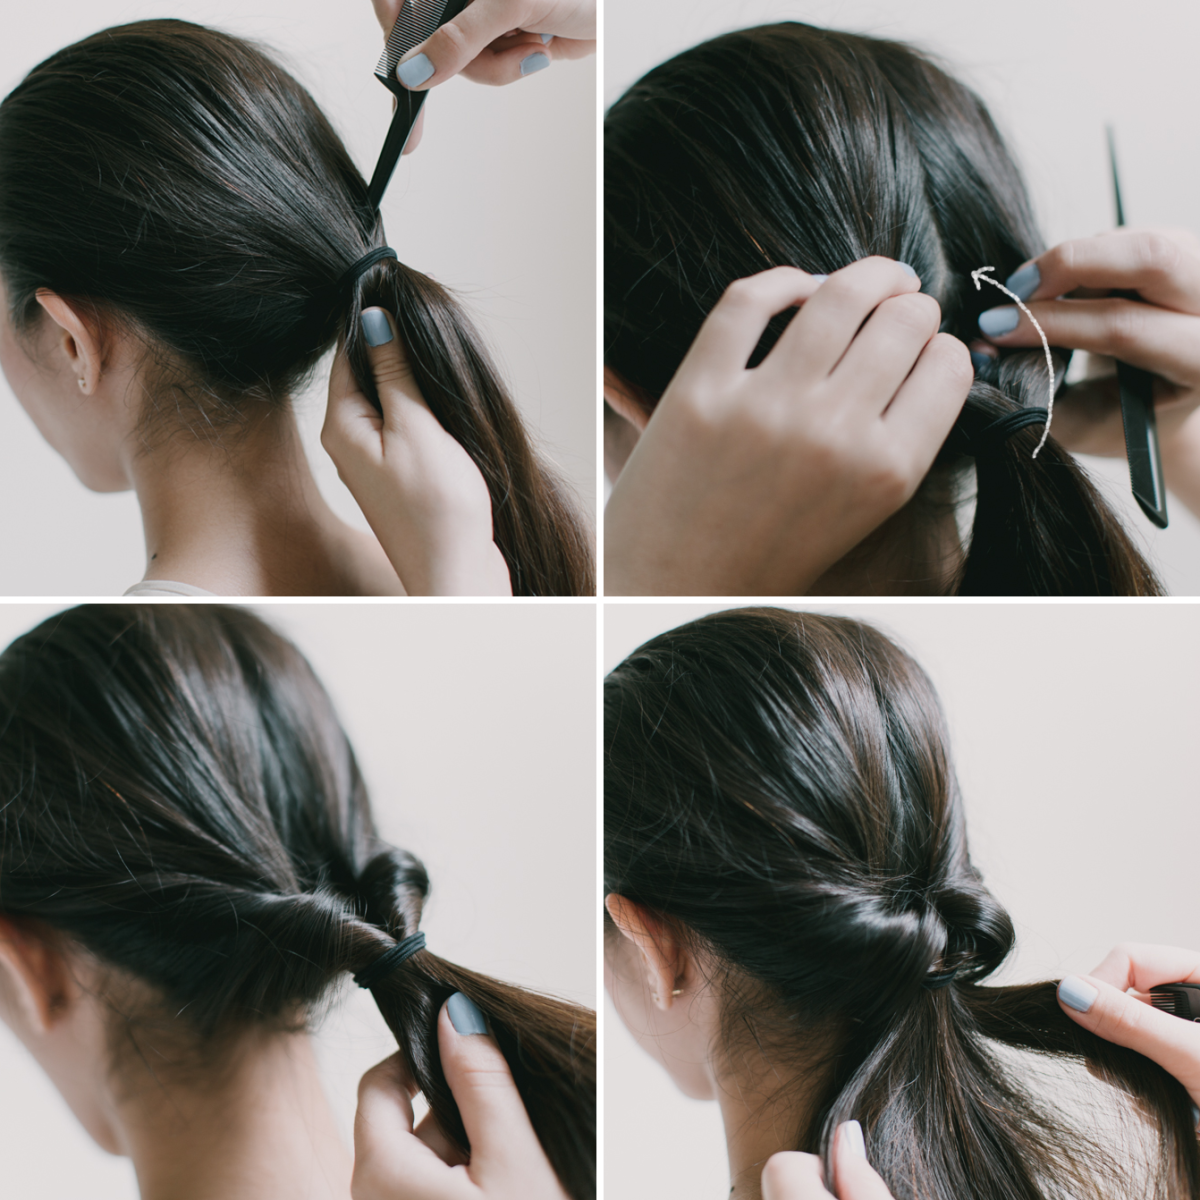 How to Do an Easy and Elegant Faux Fishtail Braid - Verily